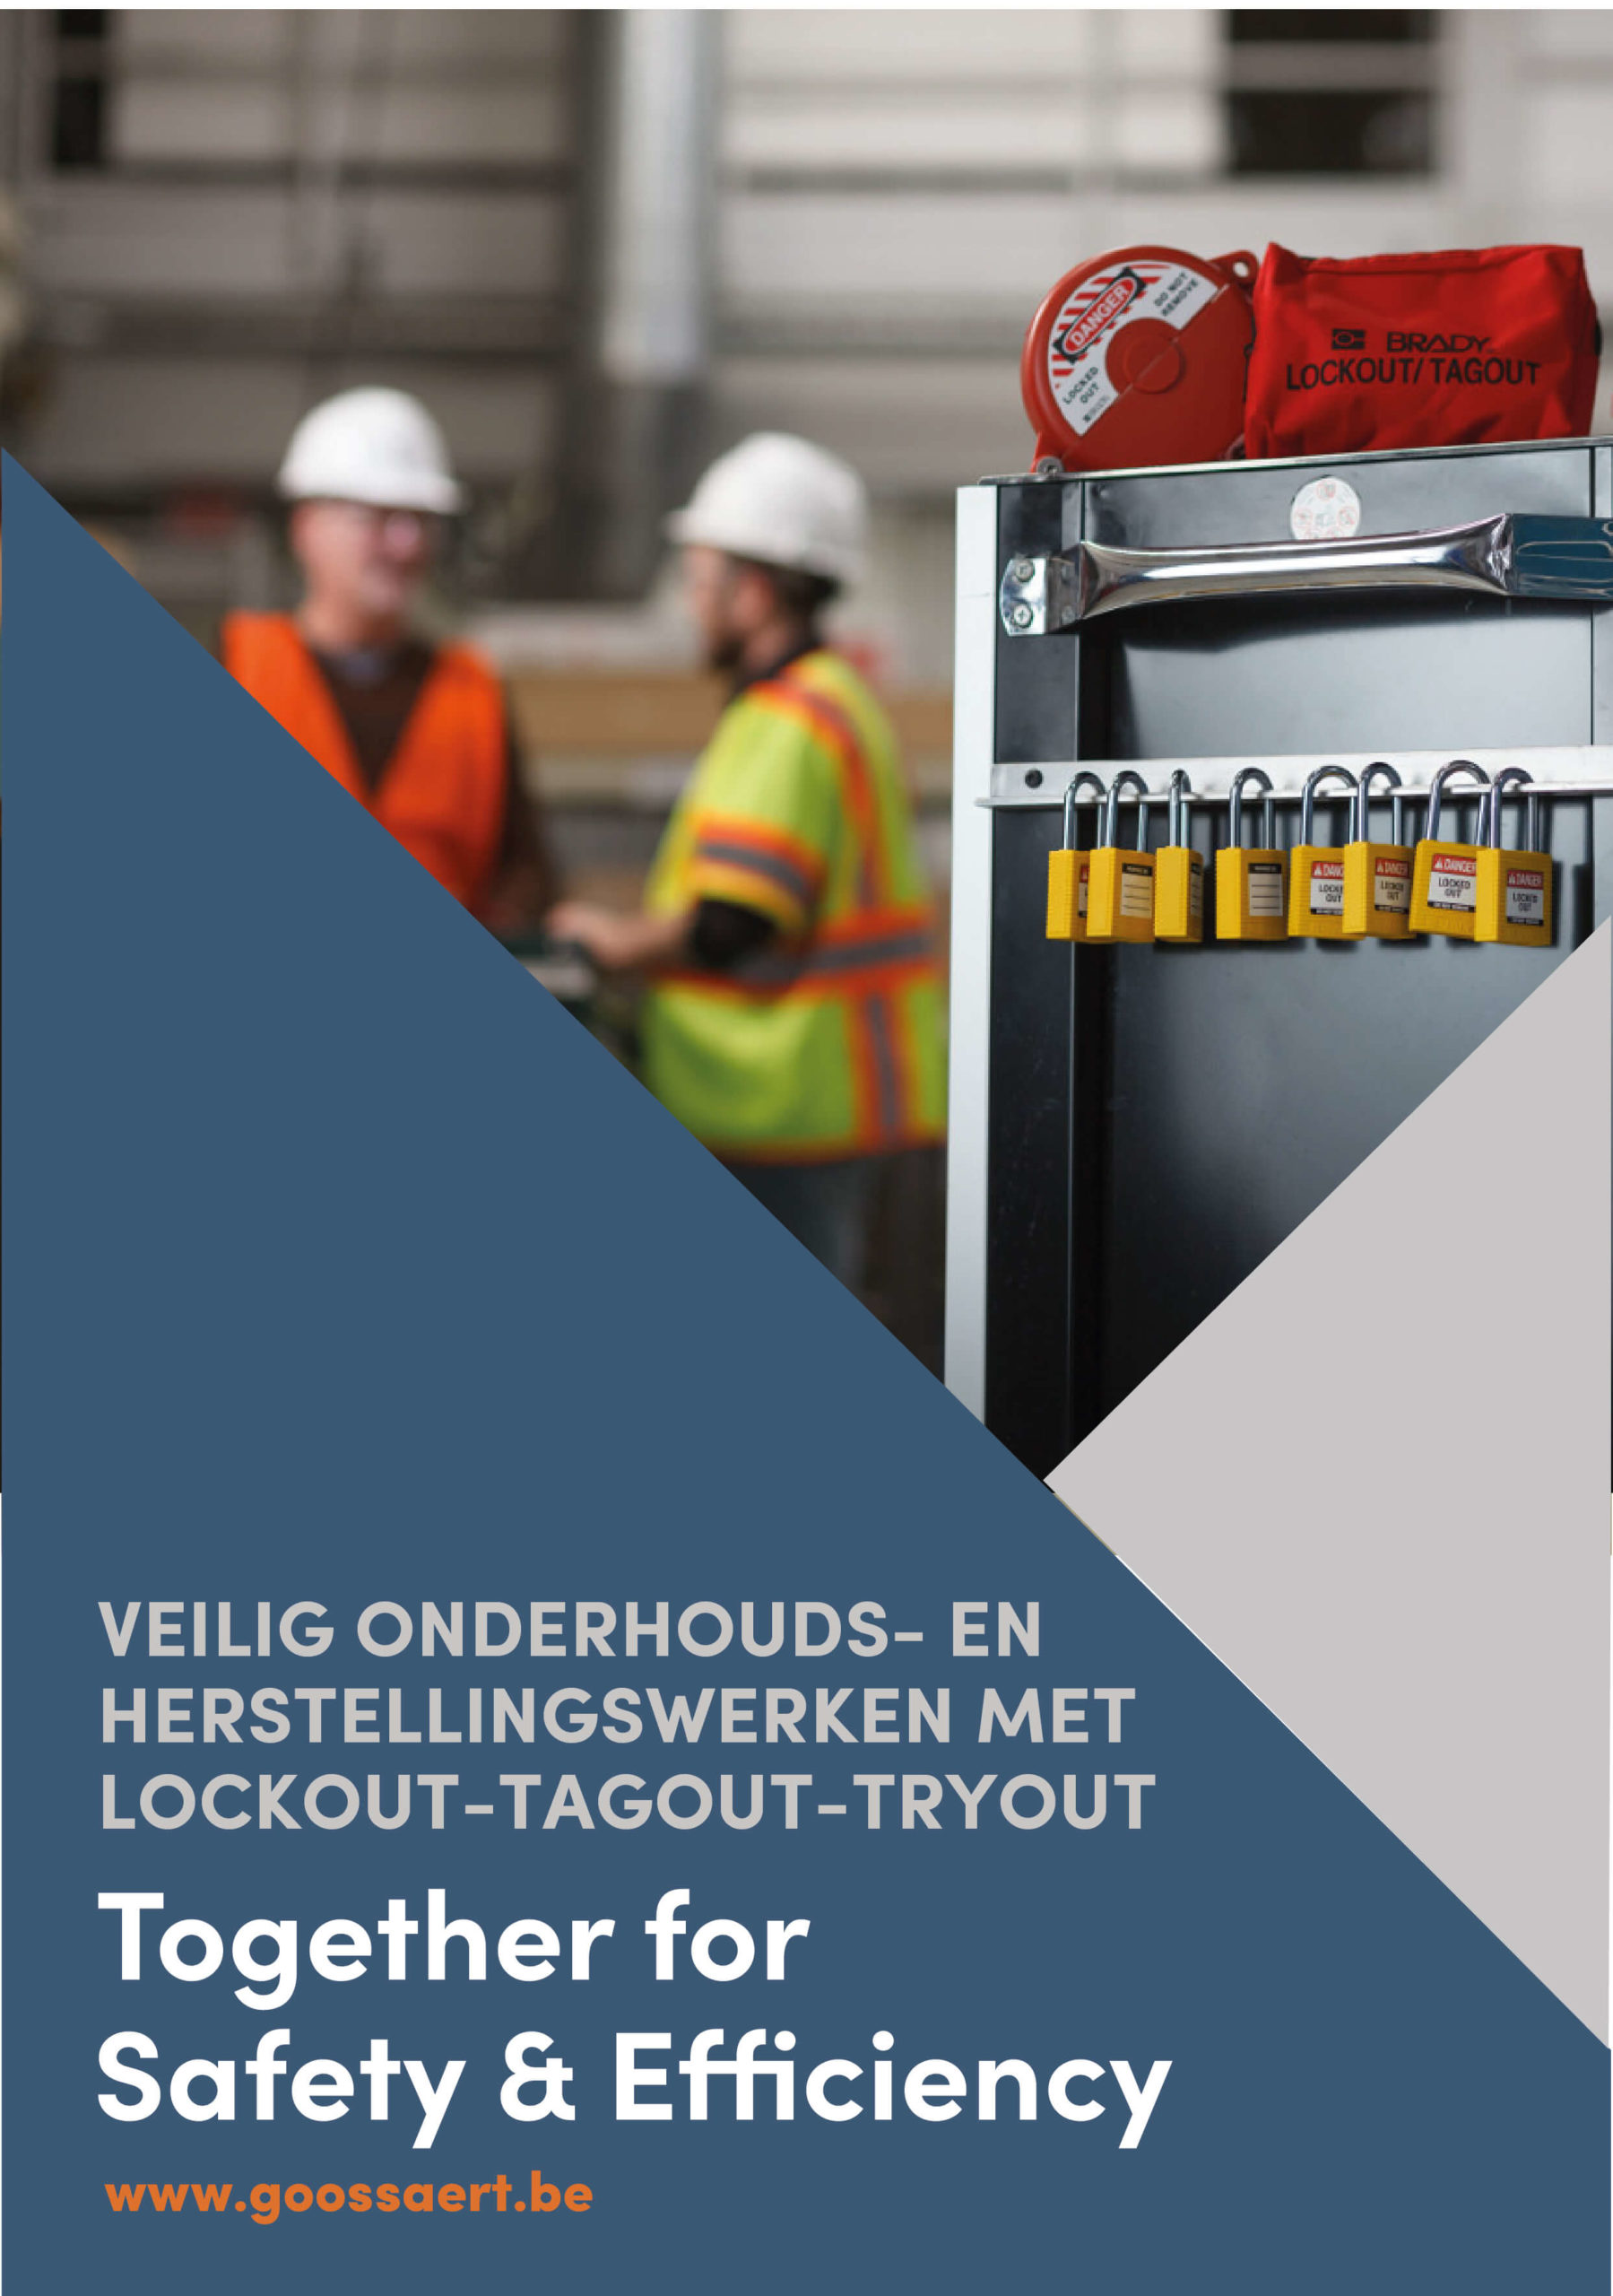 Lockout-tagout-tryout whitepaper